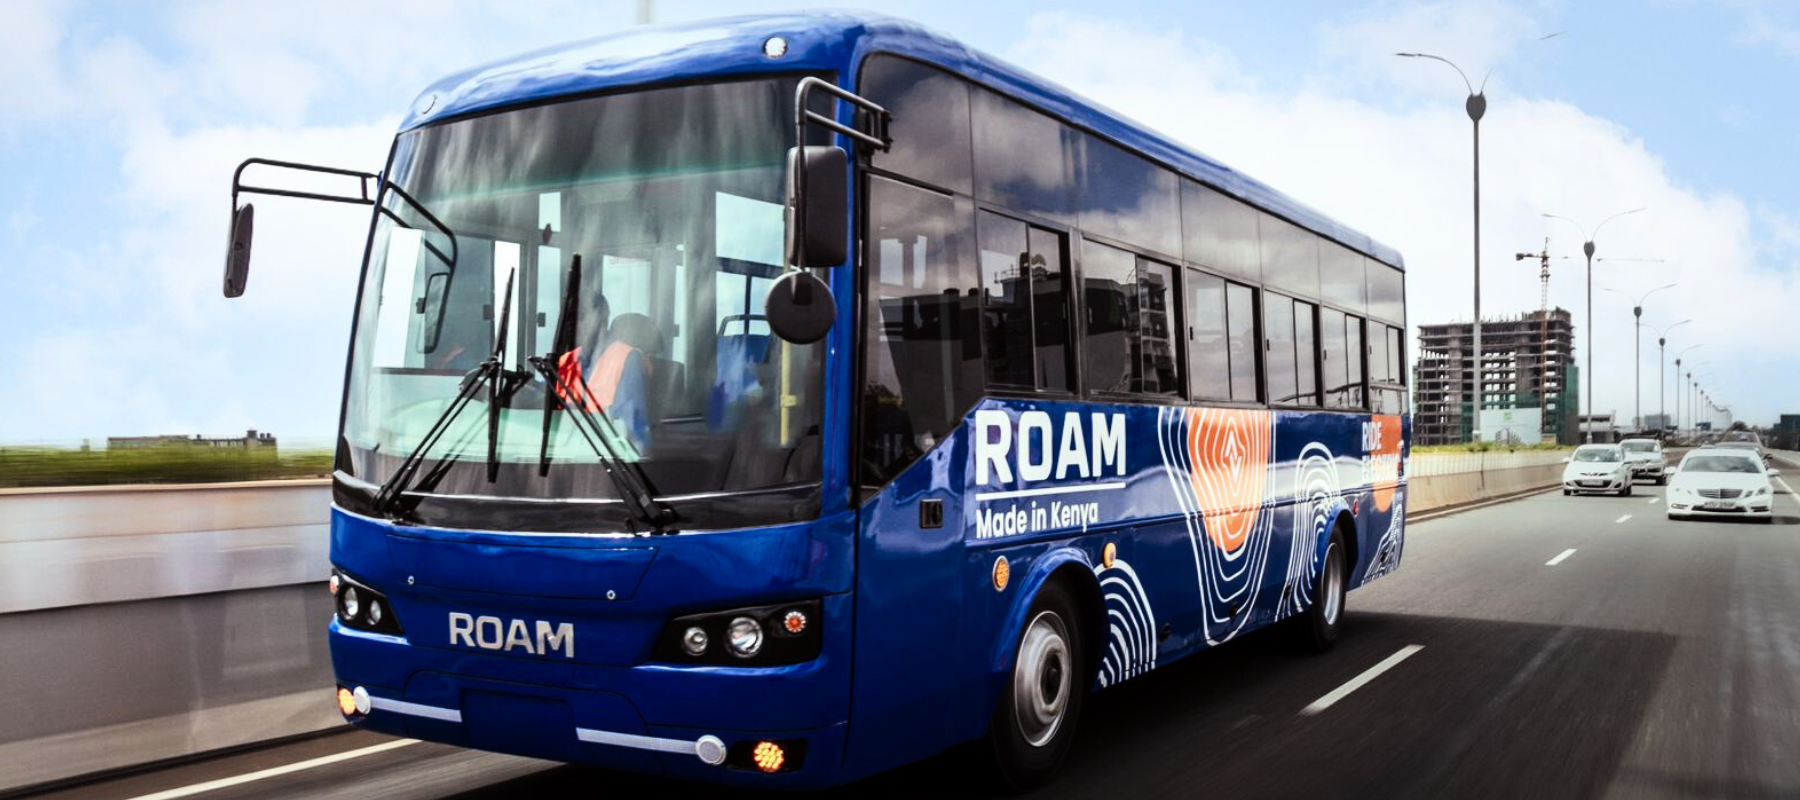 Roam secures $24m Series A funding to accelerate innovation, electric vehicle production in Kenya